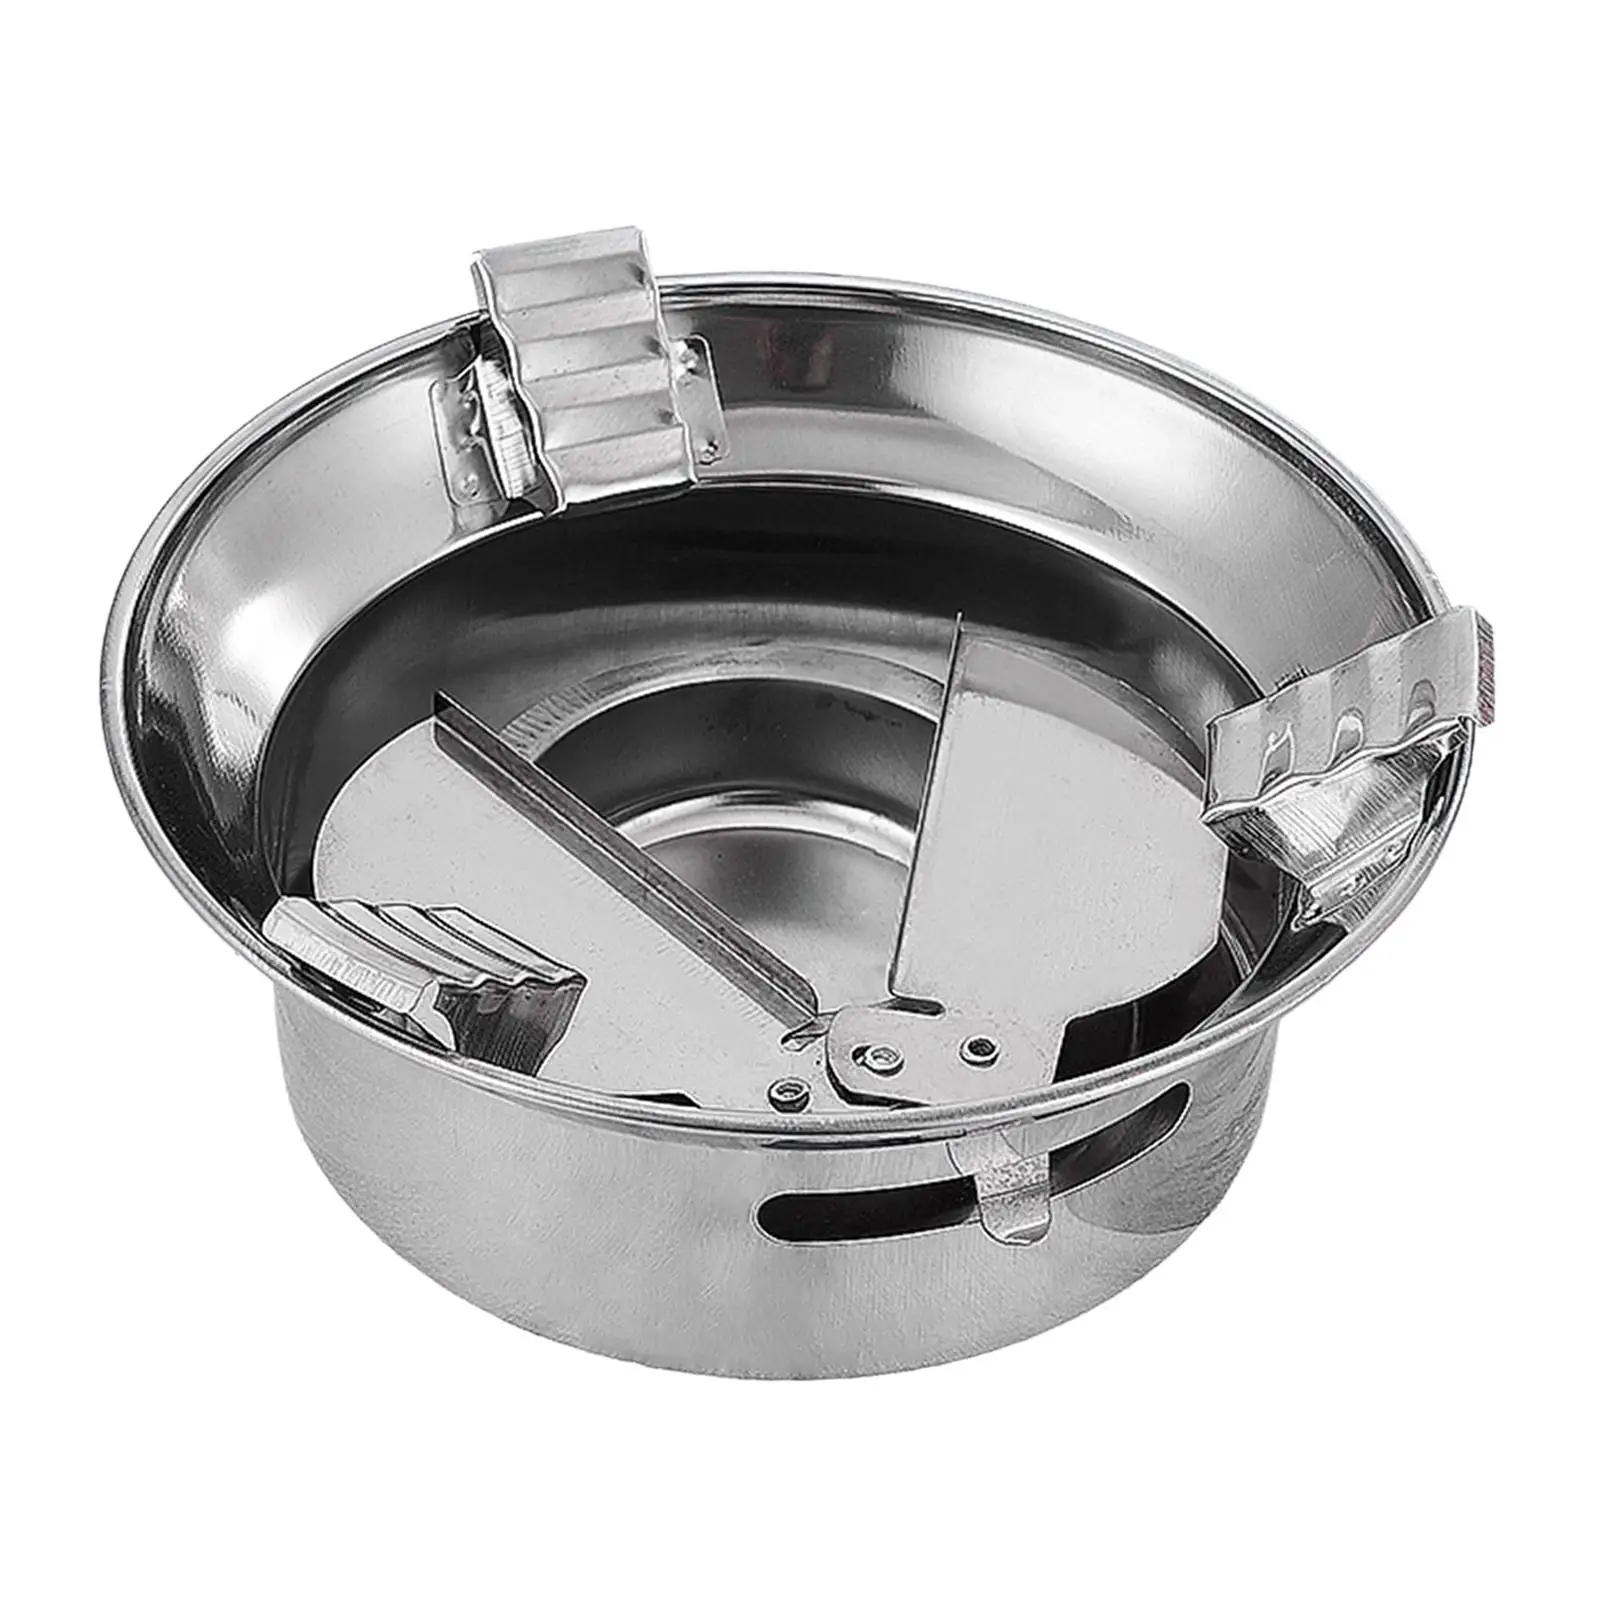 Outdoor Alcohol Stainless Steel Anti Slip Base Convenient to Store and Carry